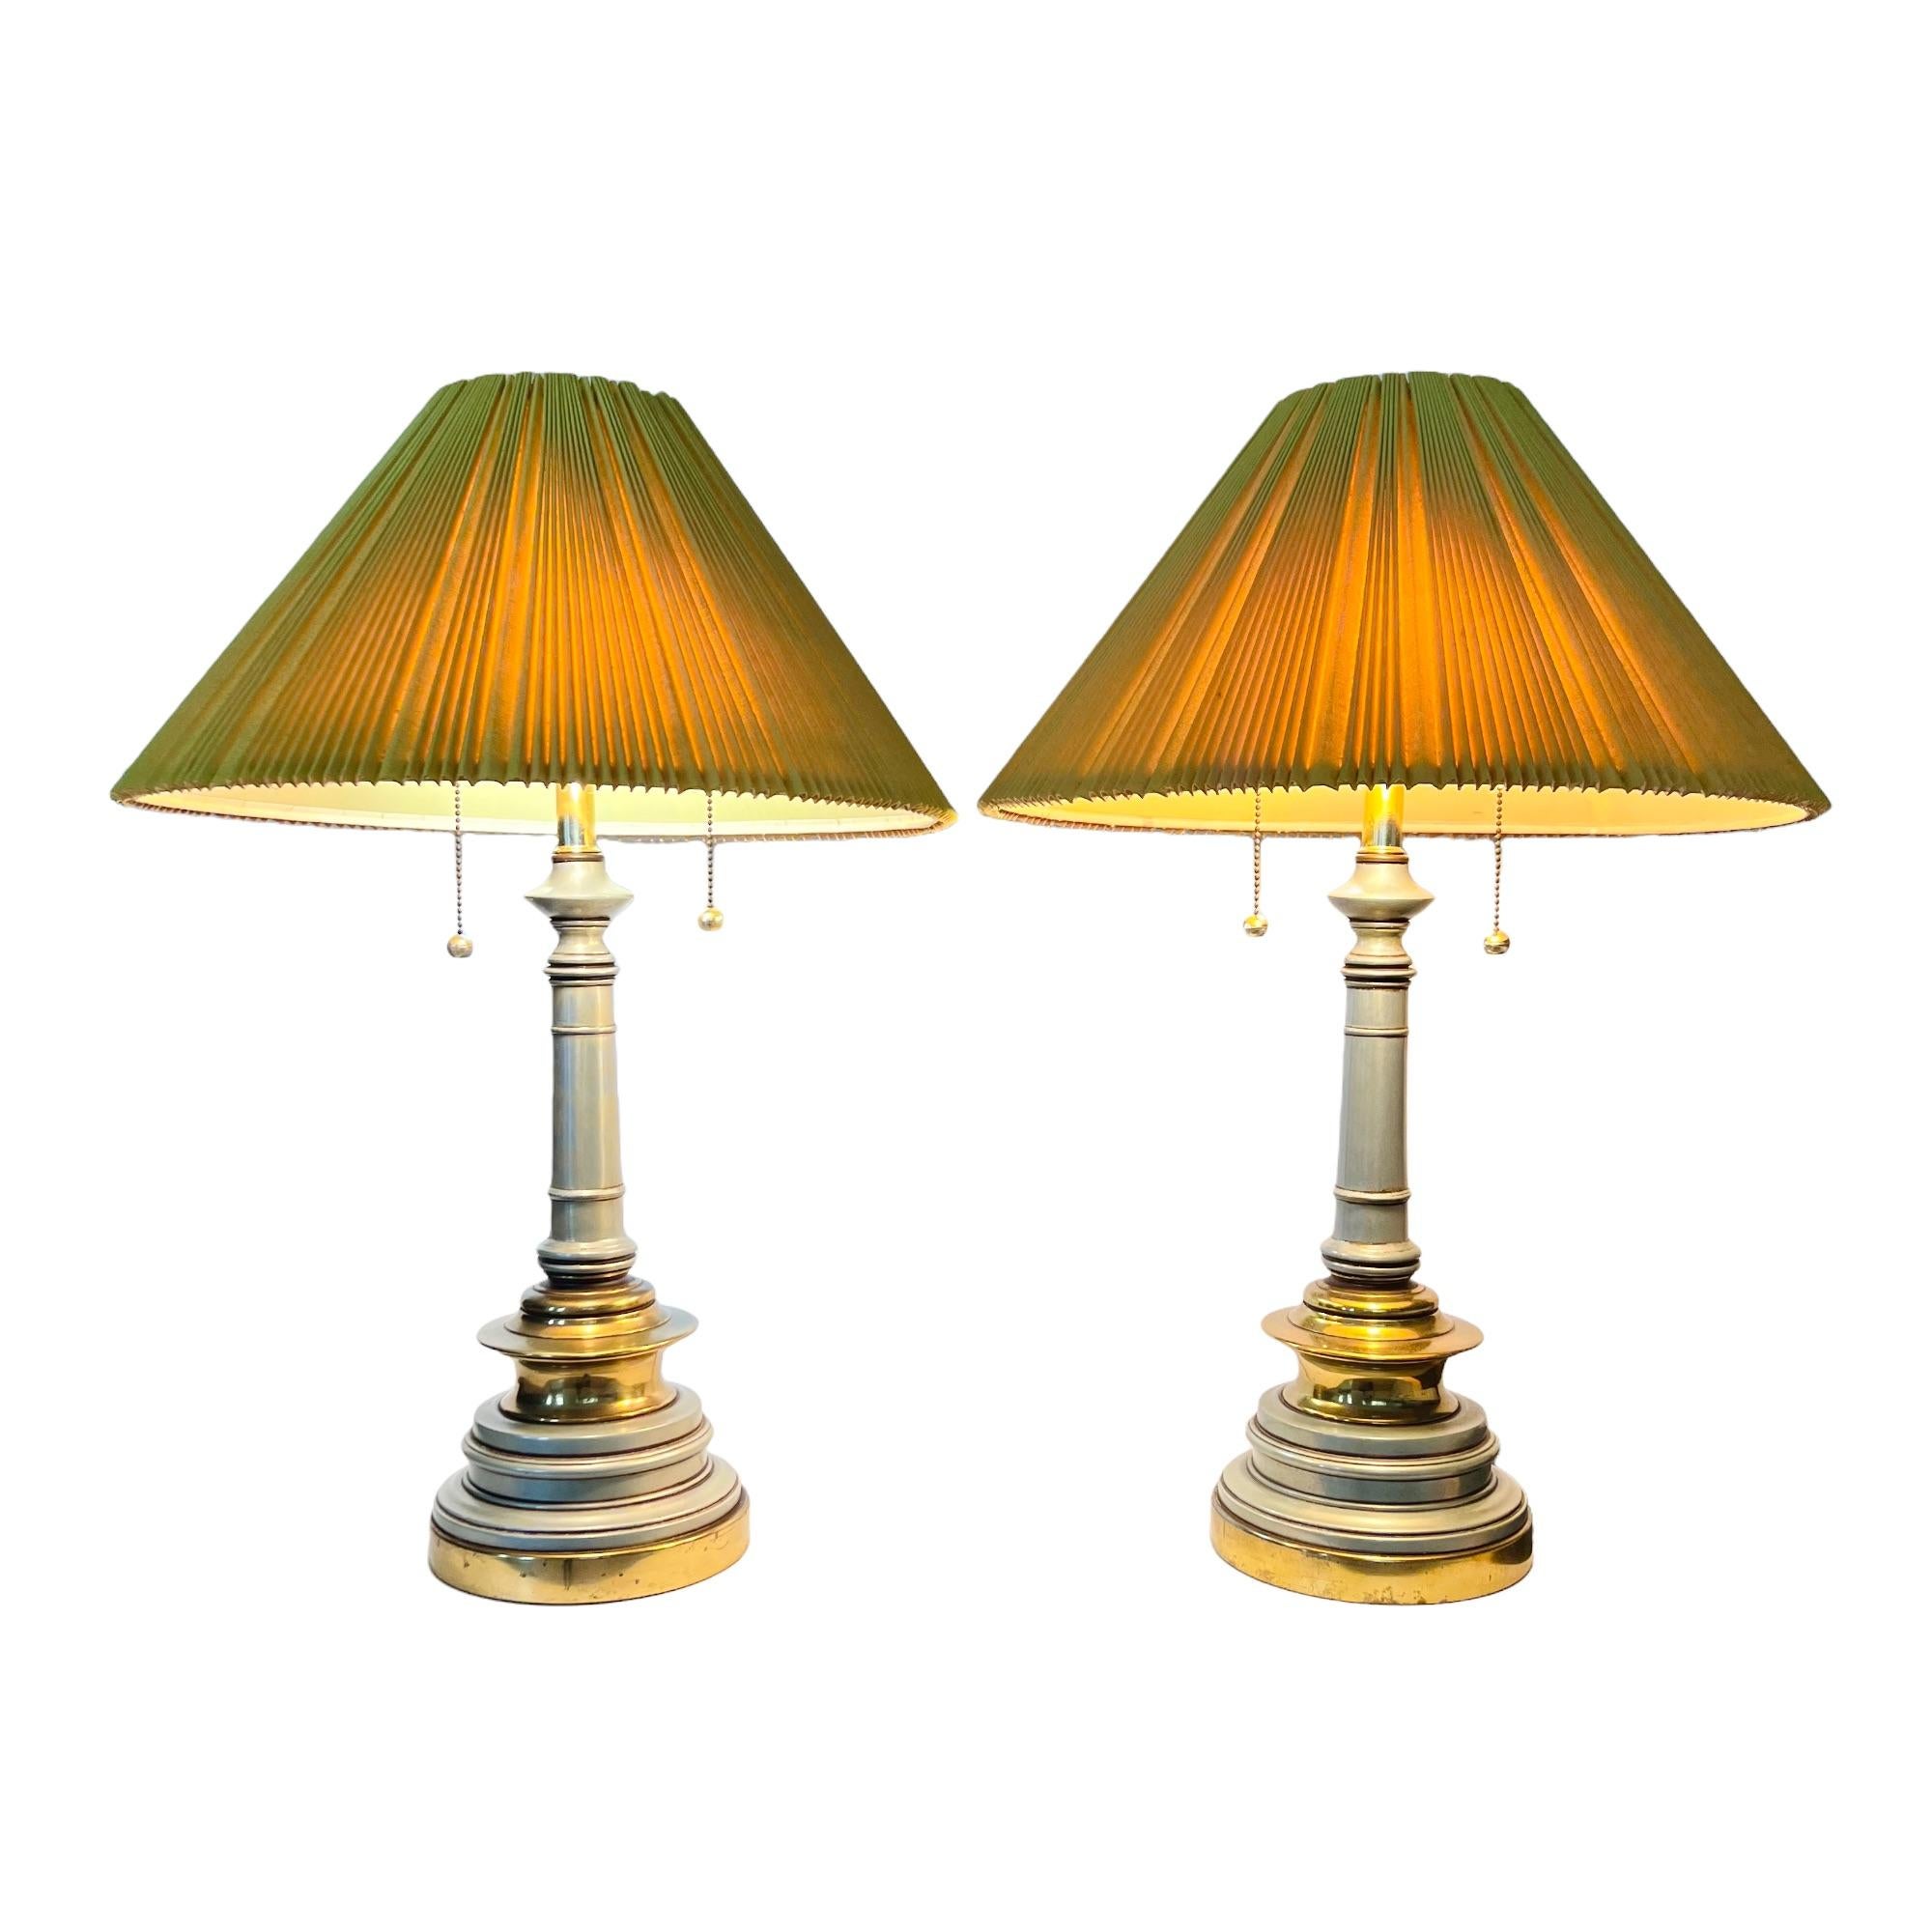 American Hollywood Regency Enamel & Brass Lamps with Yellow Shades, a Pair